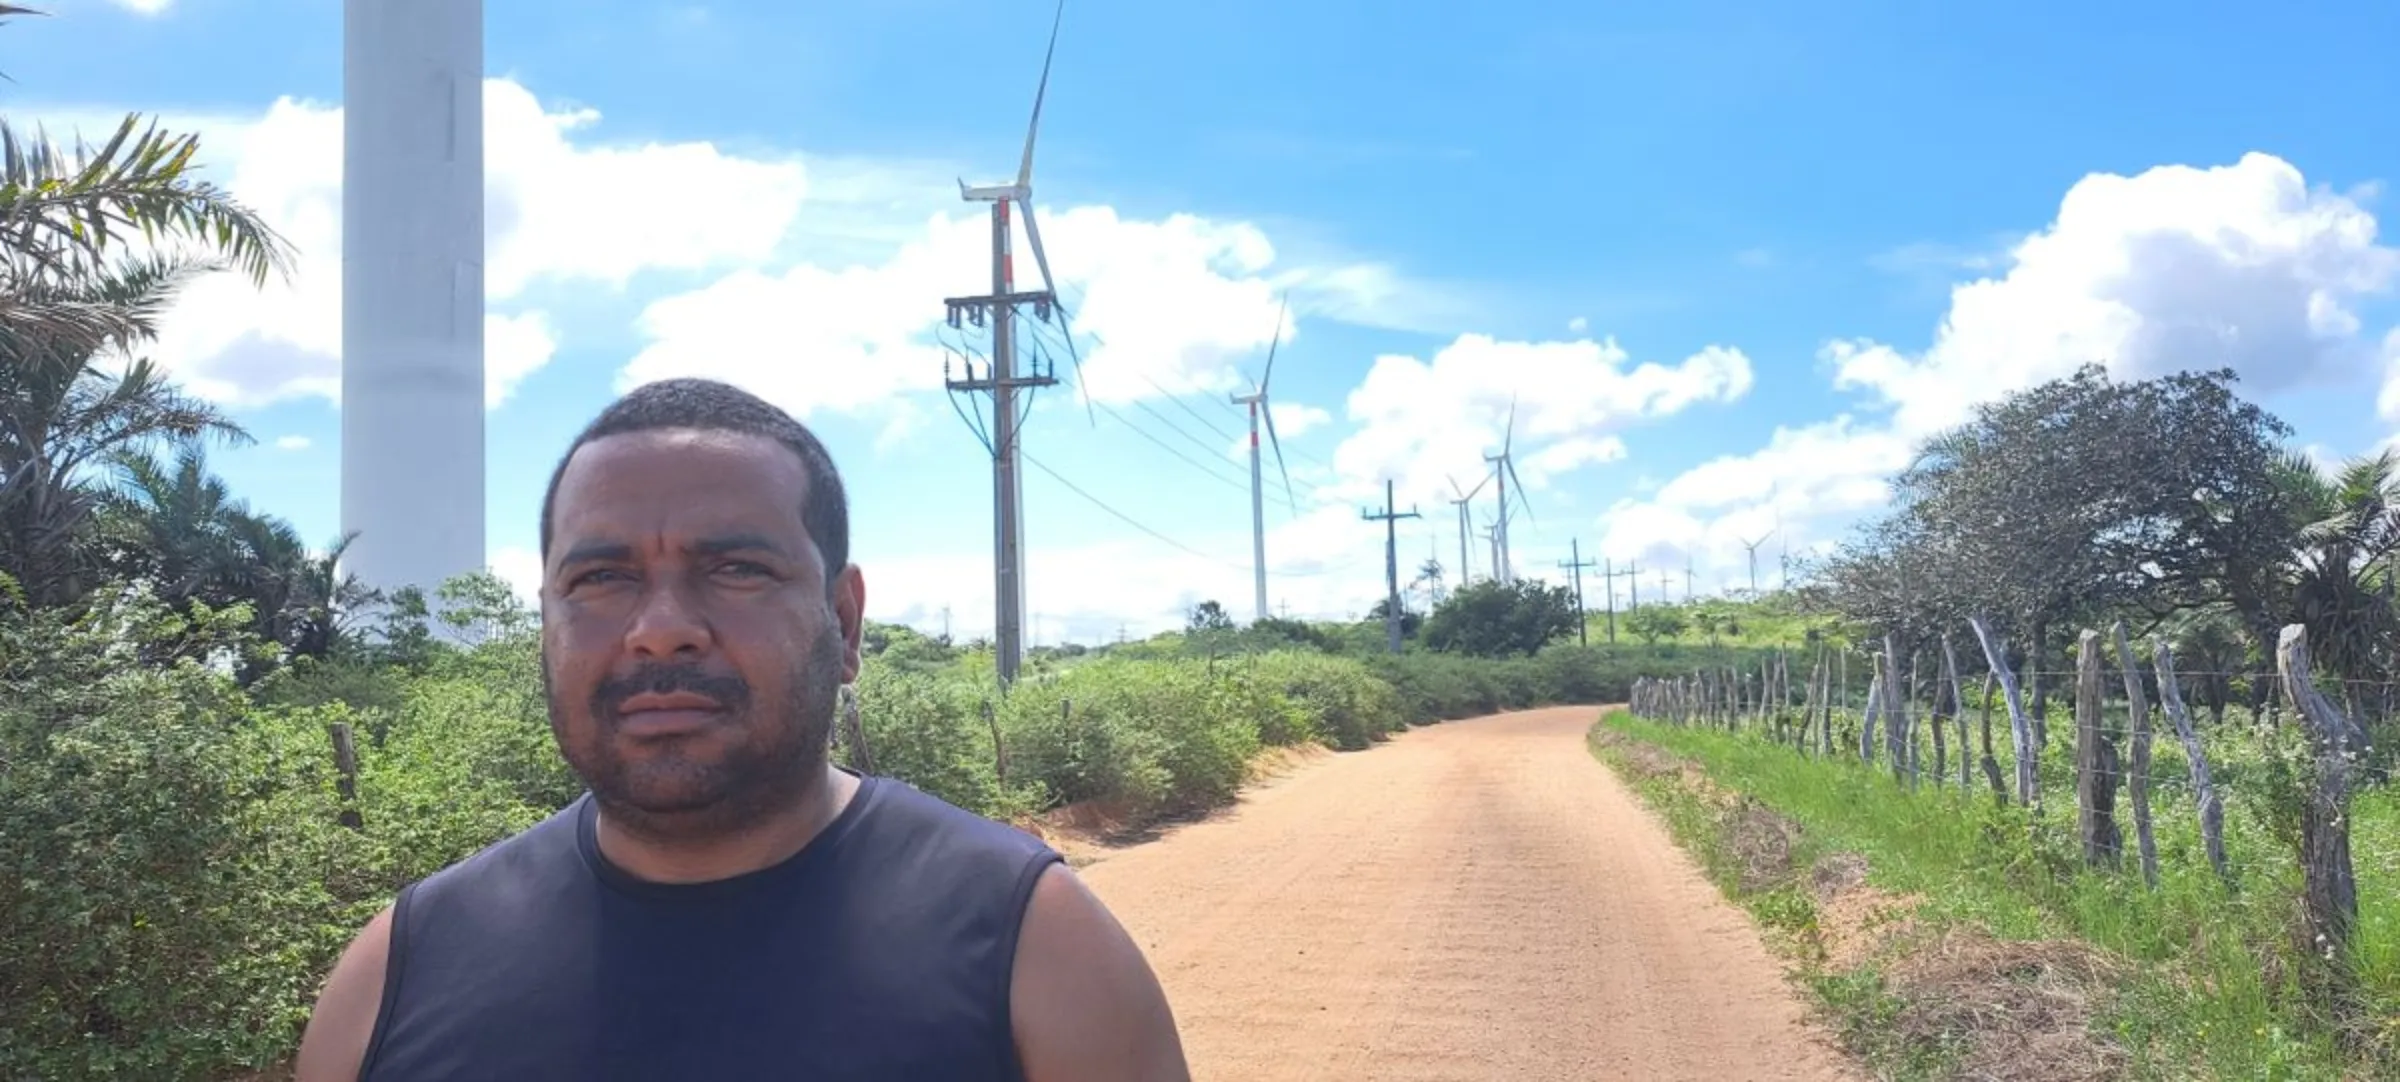 Zenivaldo Bezerra, leader of the Entre Serras Pankararu people, poses for a picture next to a wind tower about 50 meters from his land in Pernambuco, Brazil, May 12, 2023. Fabio Teixeira/Thomson Reuters Foundation